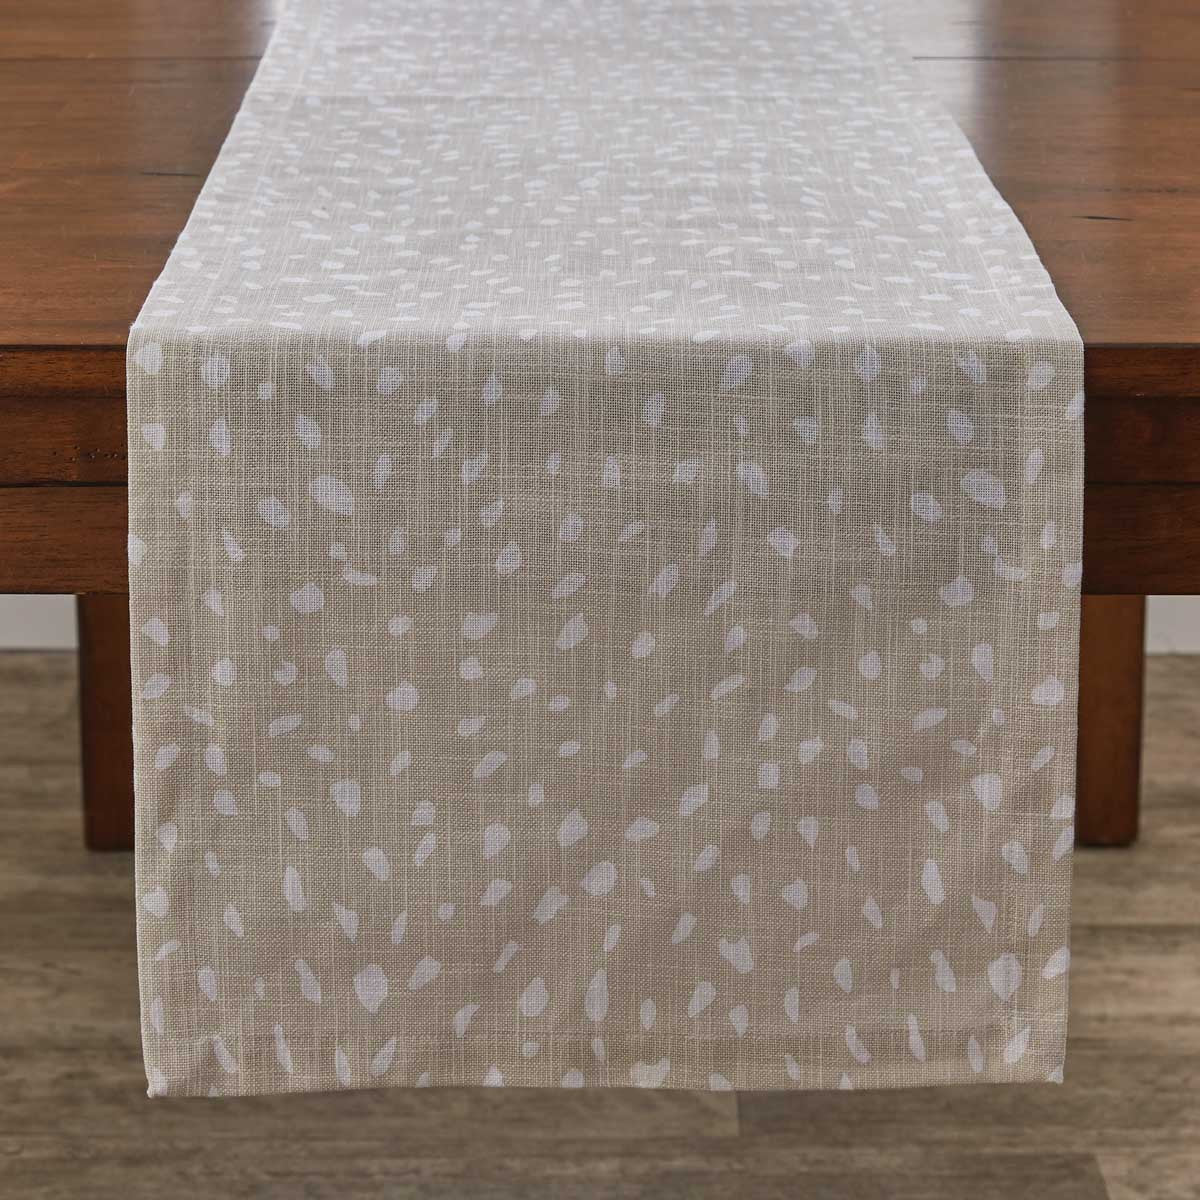 Fawn Printed Table Runner 72"L - Park Designs